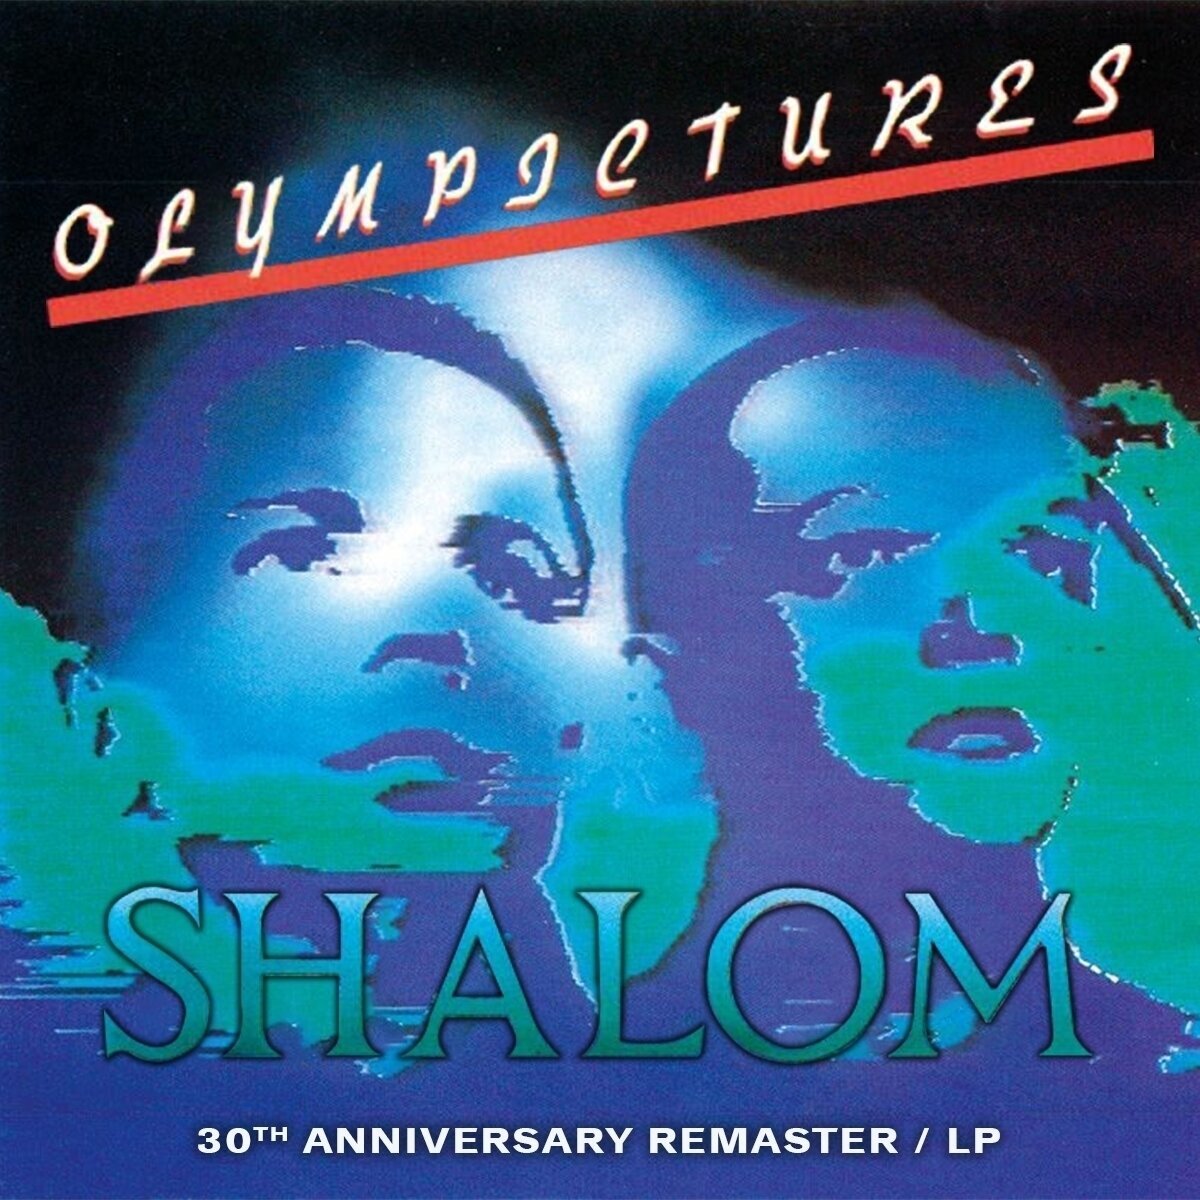 CD de música Shalom - Olympictures (30th Anniversary) (Remastered) (CD)